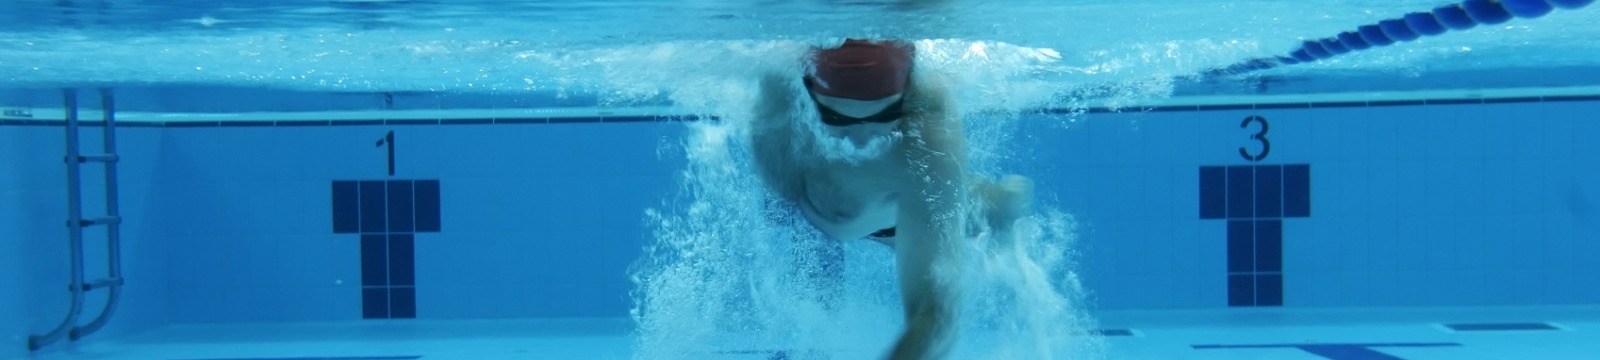 A person swimming underwater